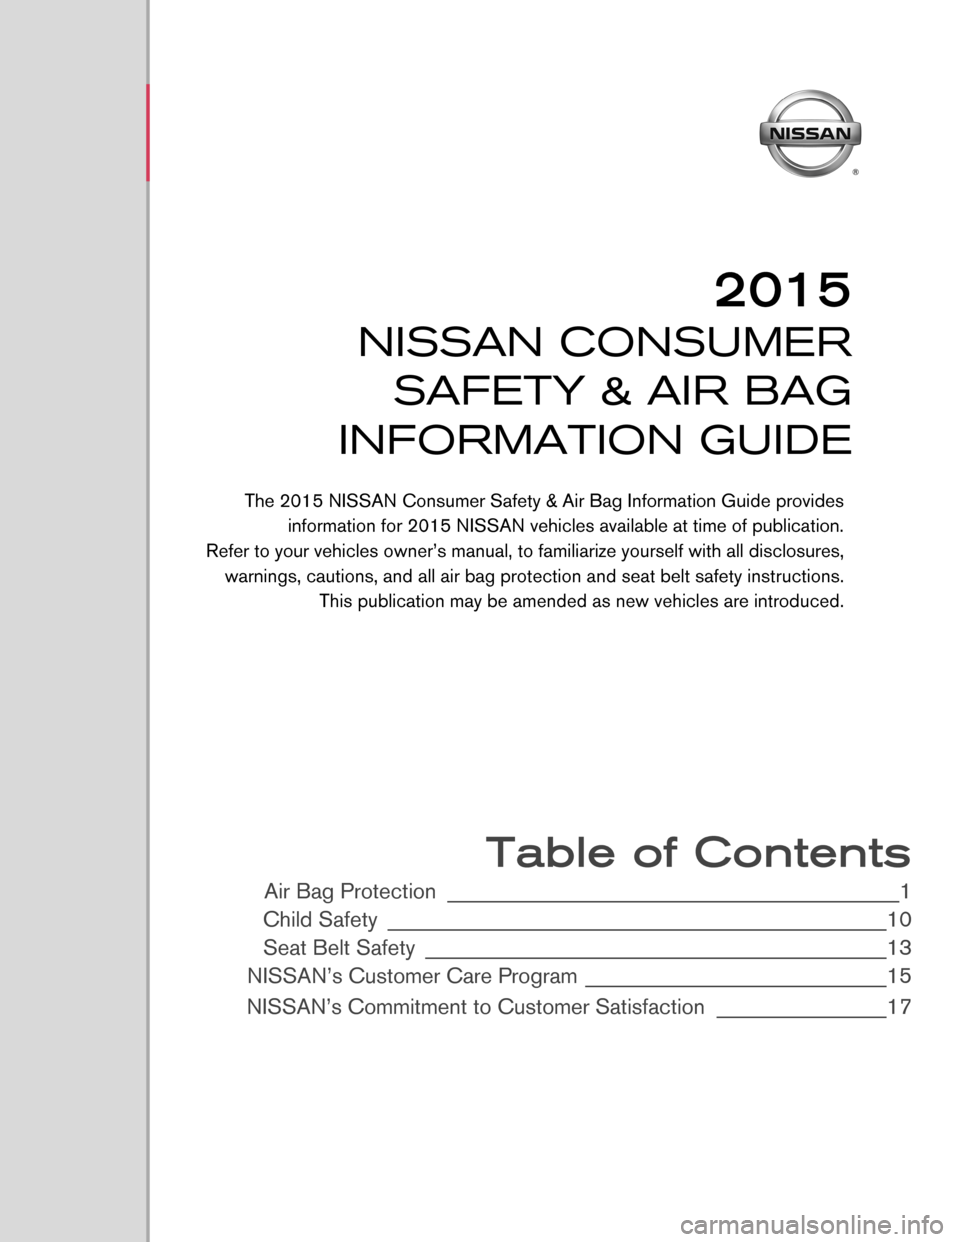 NISSAN VERSA 2015 1.G Consumer Safety Air Bag Information Guide  
 
 
 
 
 
 
 
 
 
 
 
 
 
 
 
 
 
 
 
 
 
 
 Table of Contents 
Air Bag Protection __________________\d__________________\d____________1 
Child \fafety _________________________\d__________________\